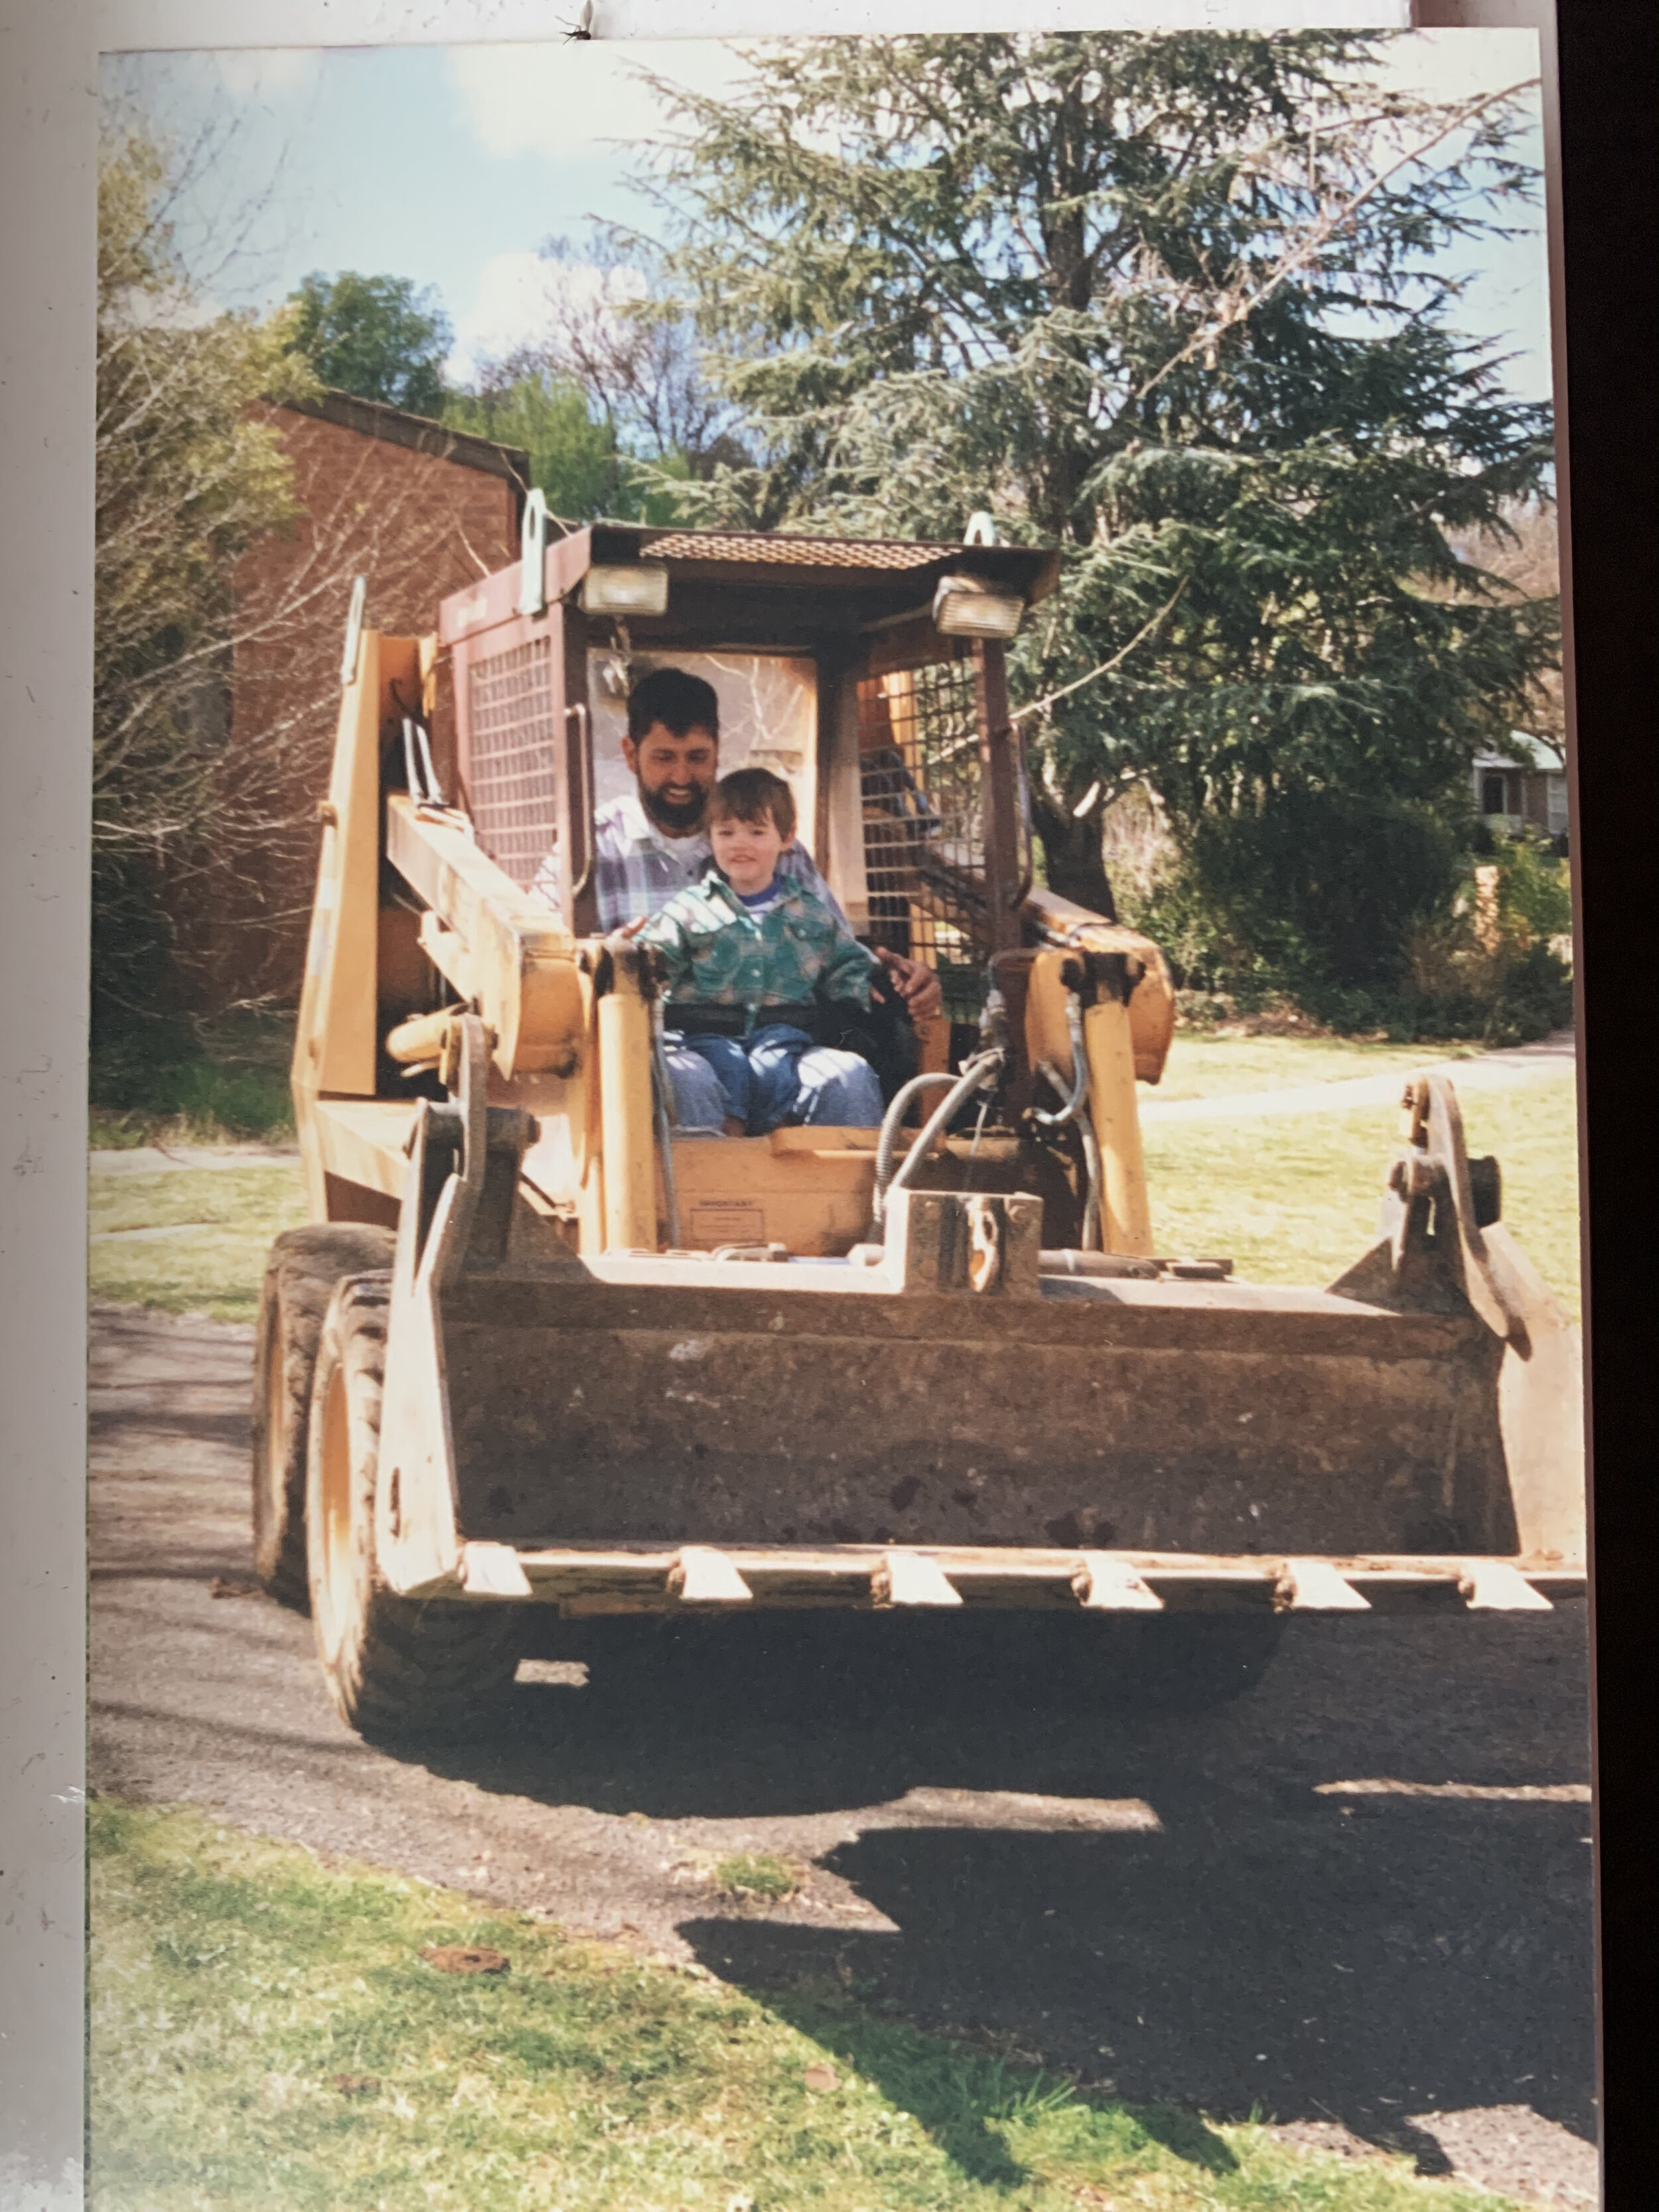  Lachlan aged 2, ‘helping’ on the bobcat that was used on his grandparents' house renovation. 